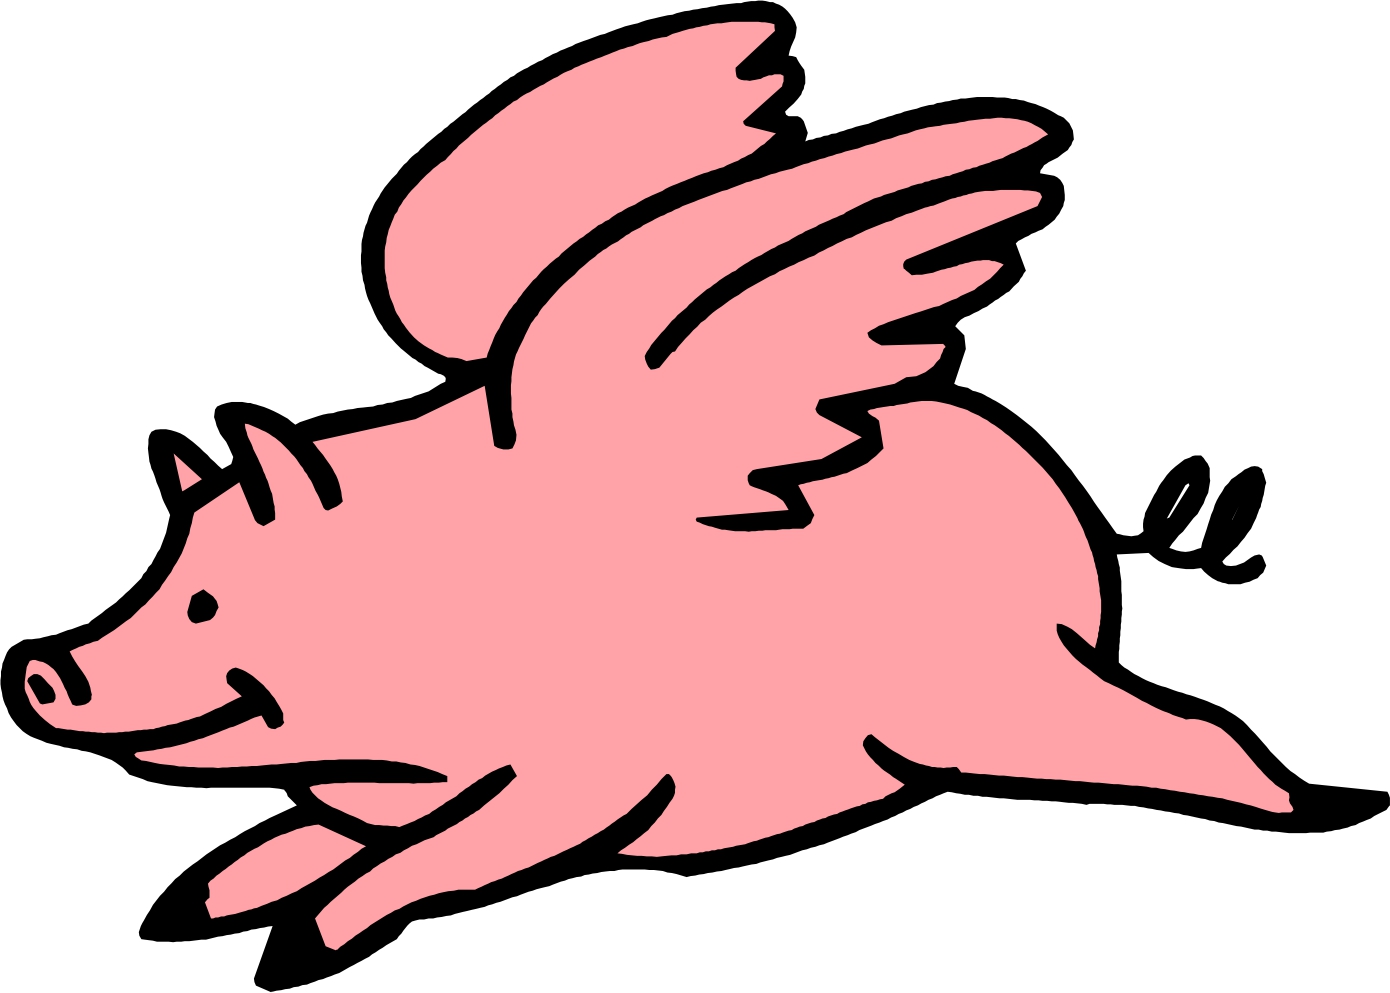 clipart of pig - photo #35